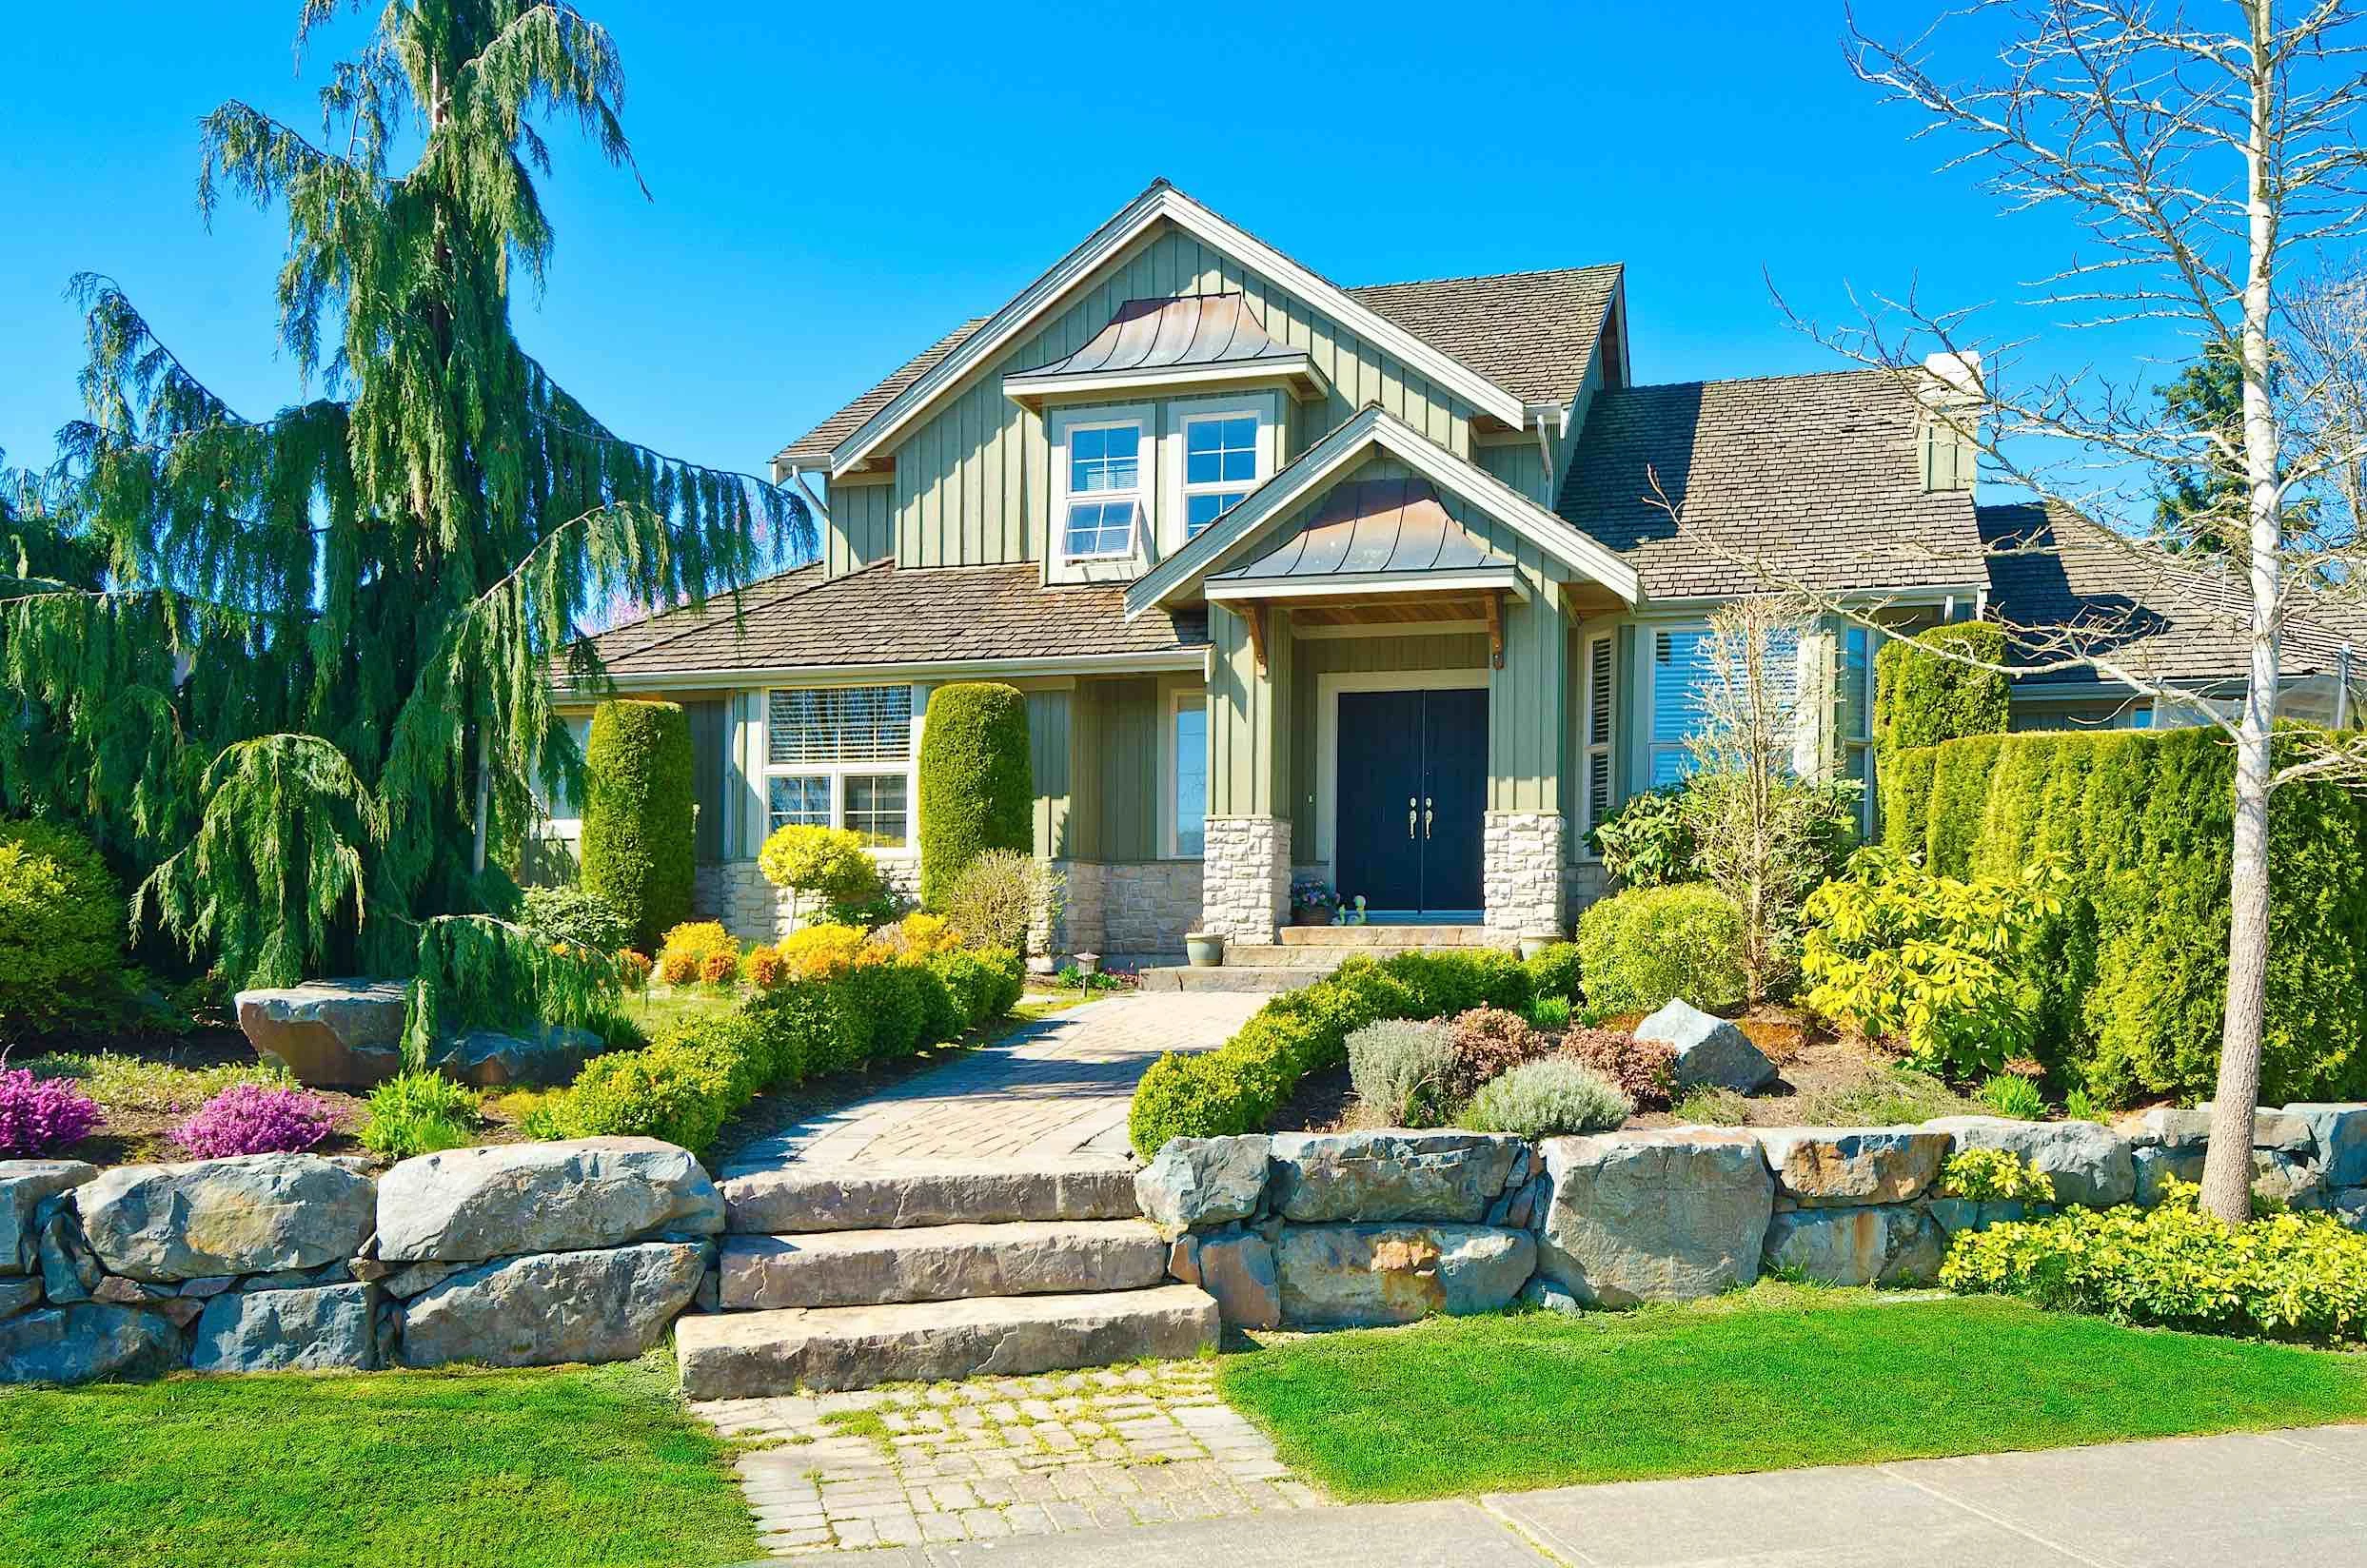 Easy Tricks To Improve Your Home's Curb Appeal